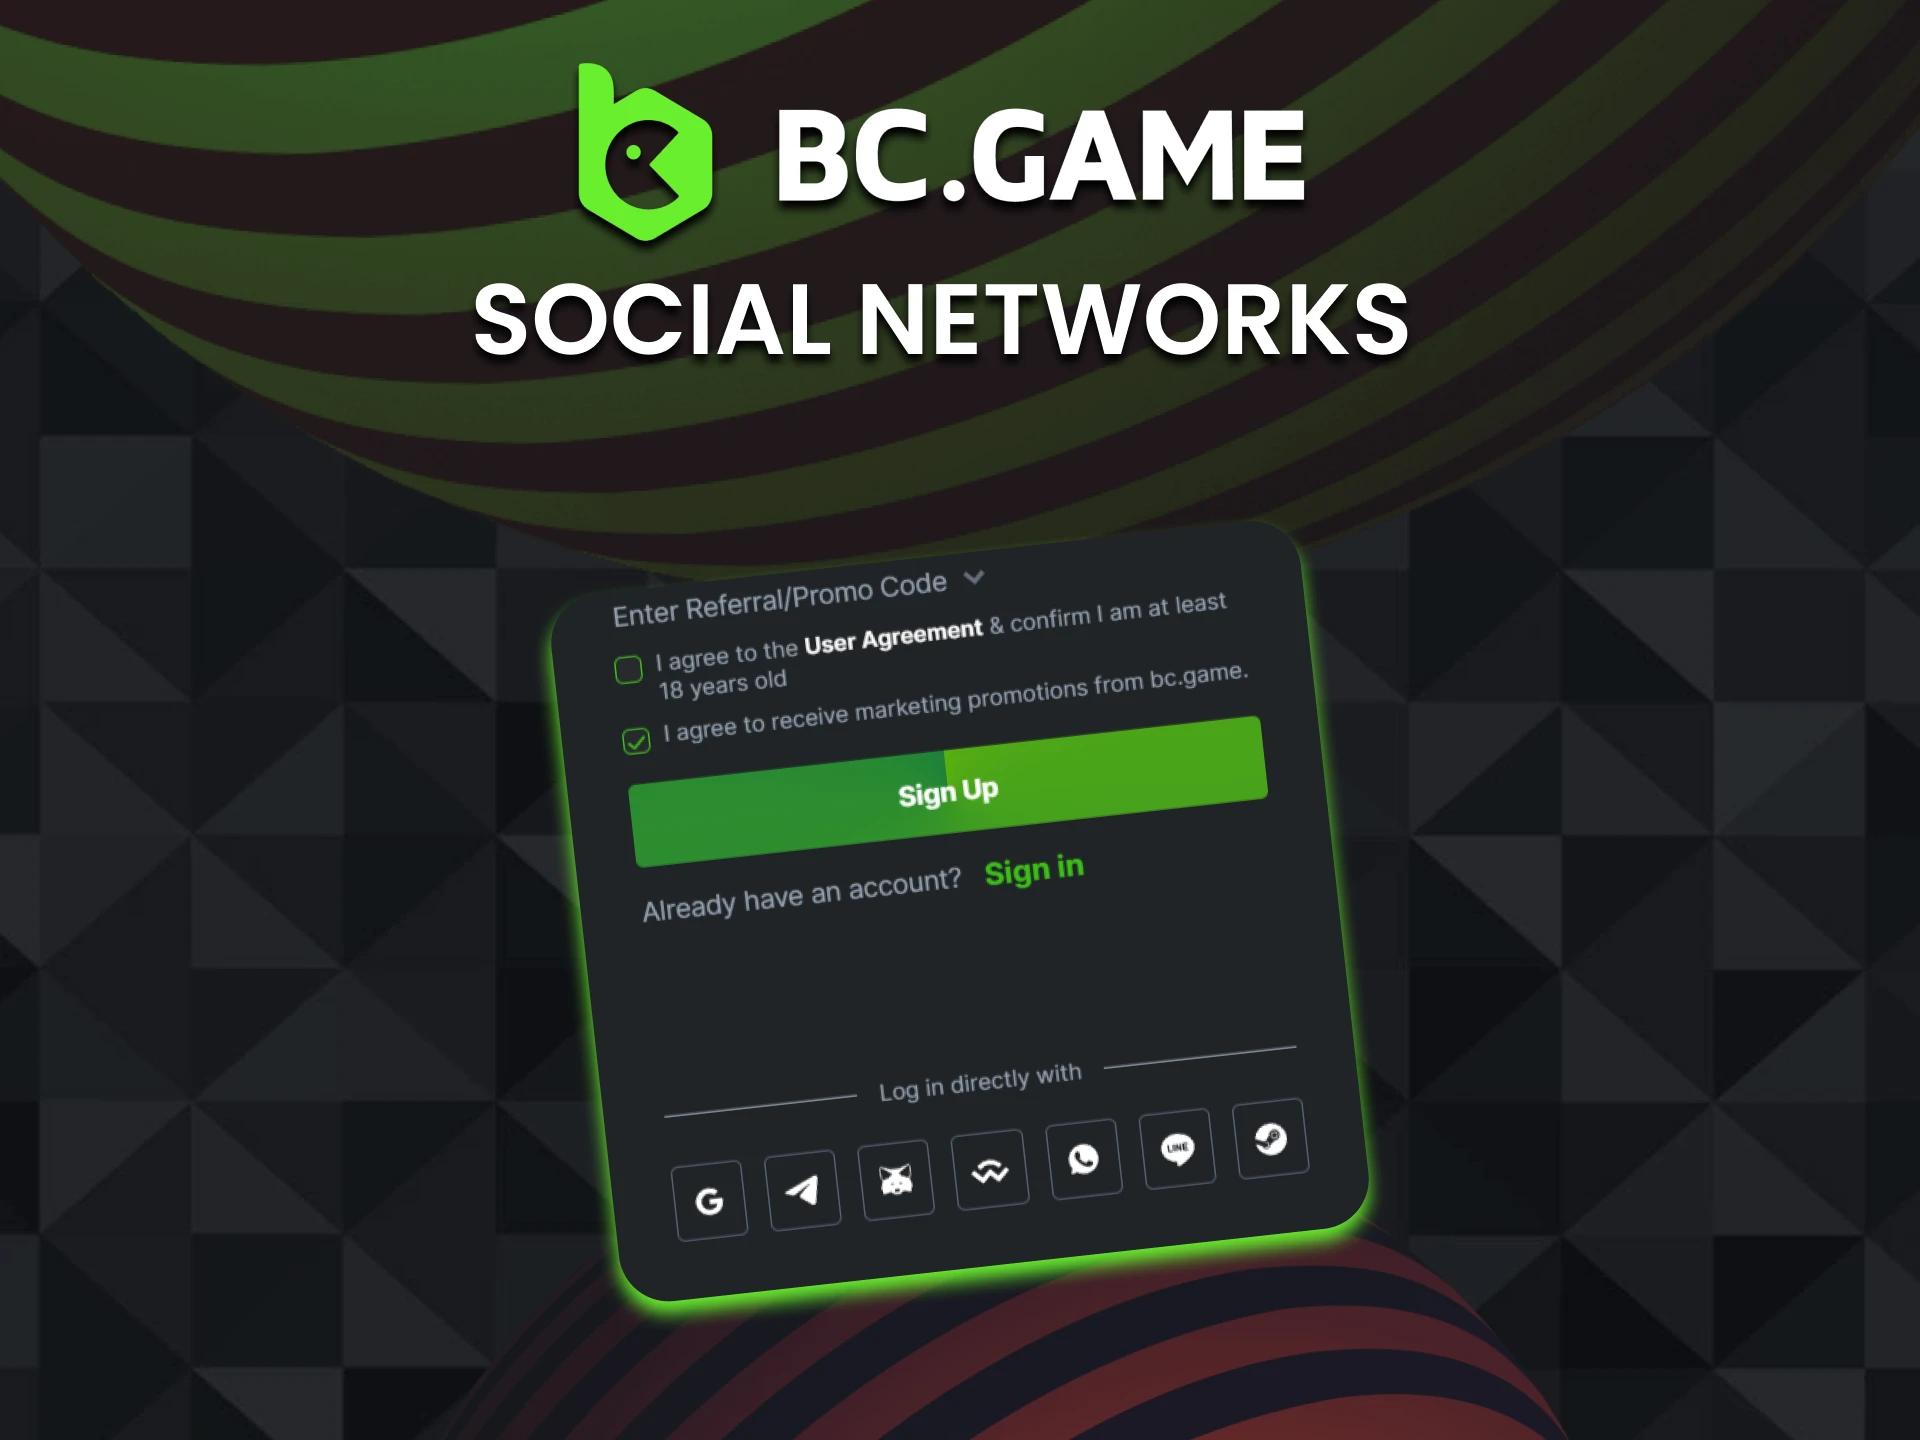 You can log into your BC Game account through social networks.